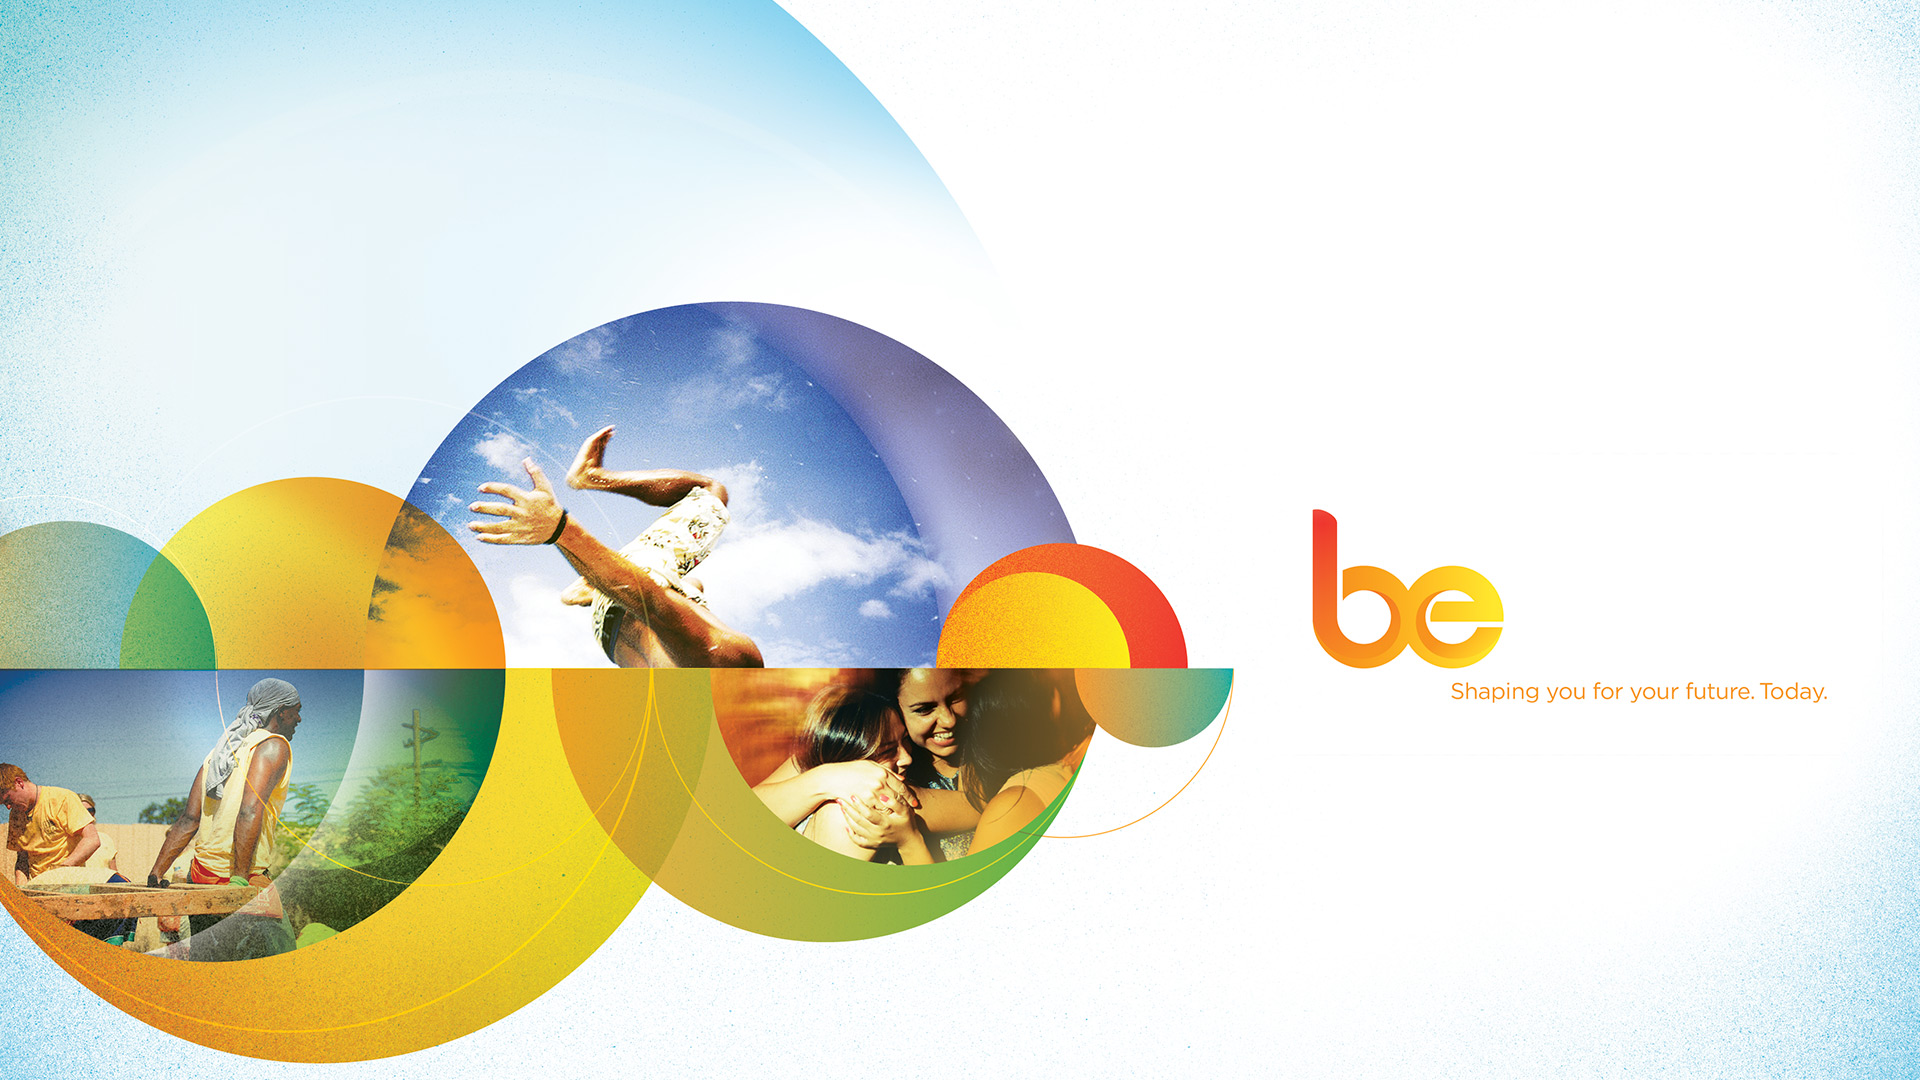 Graphic artwork for Amway's Be Experience Project created by Incubate Design